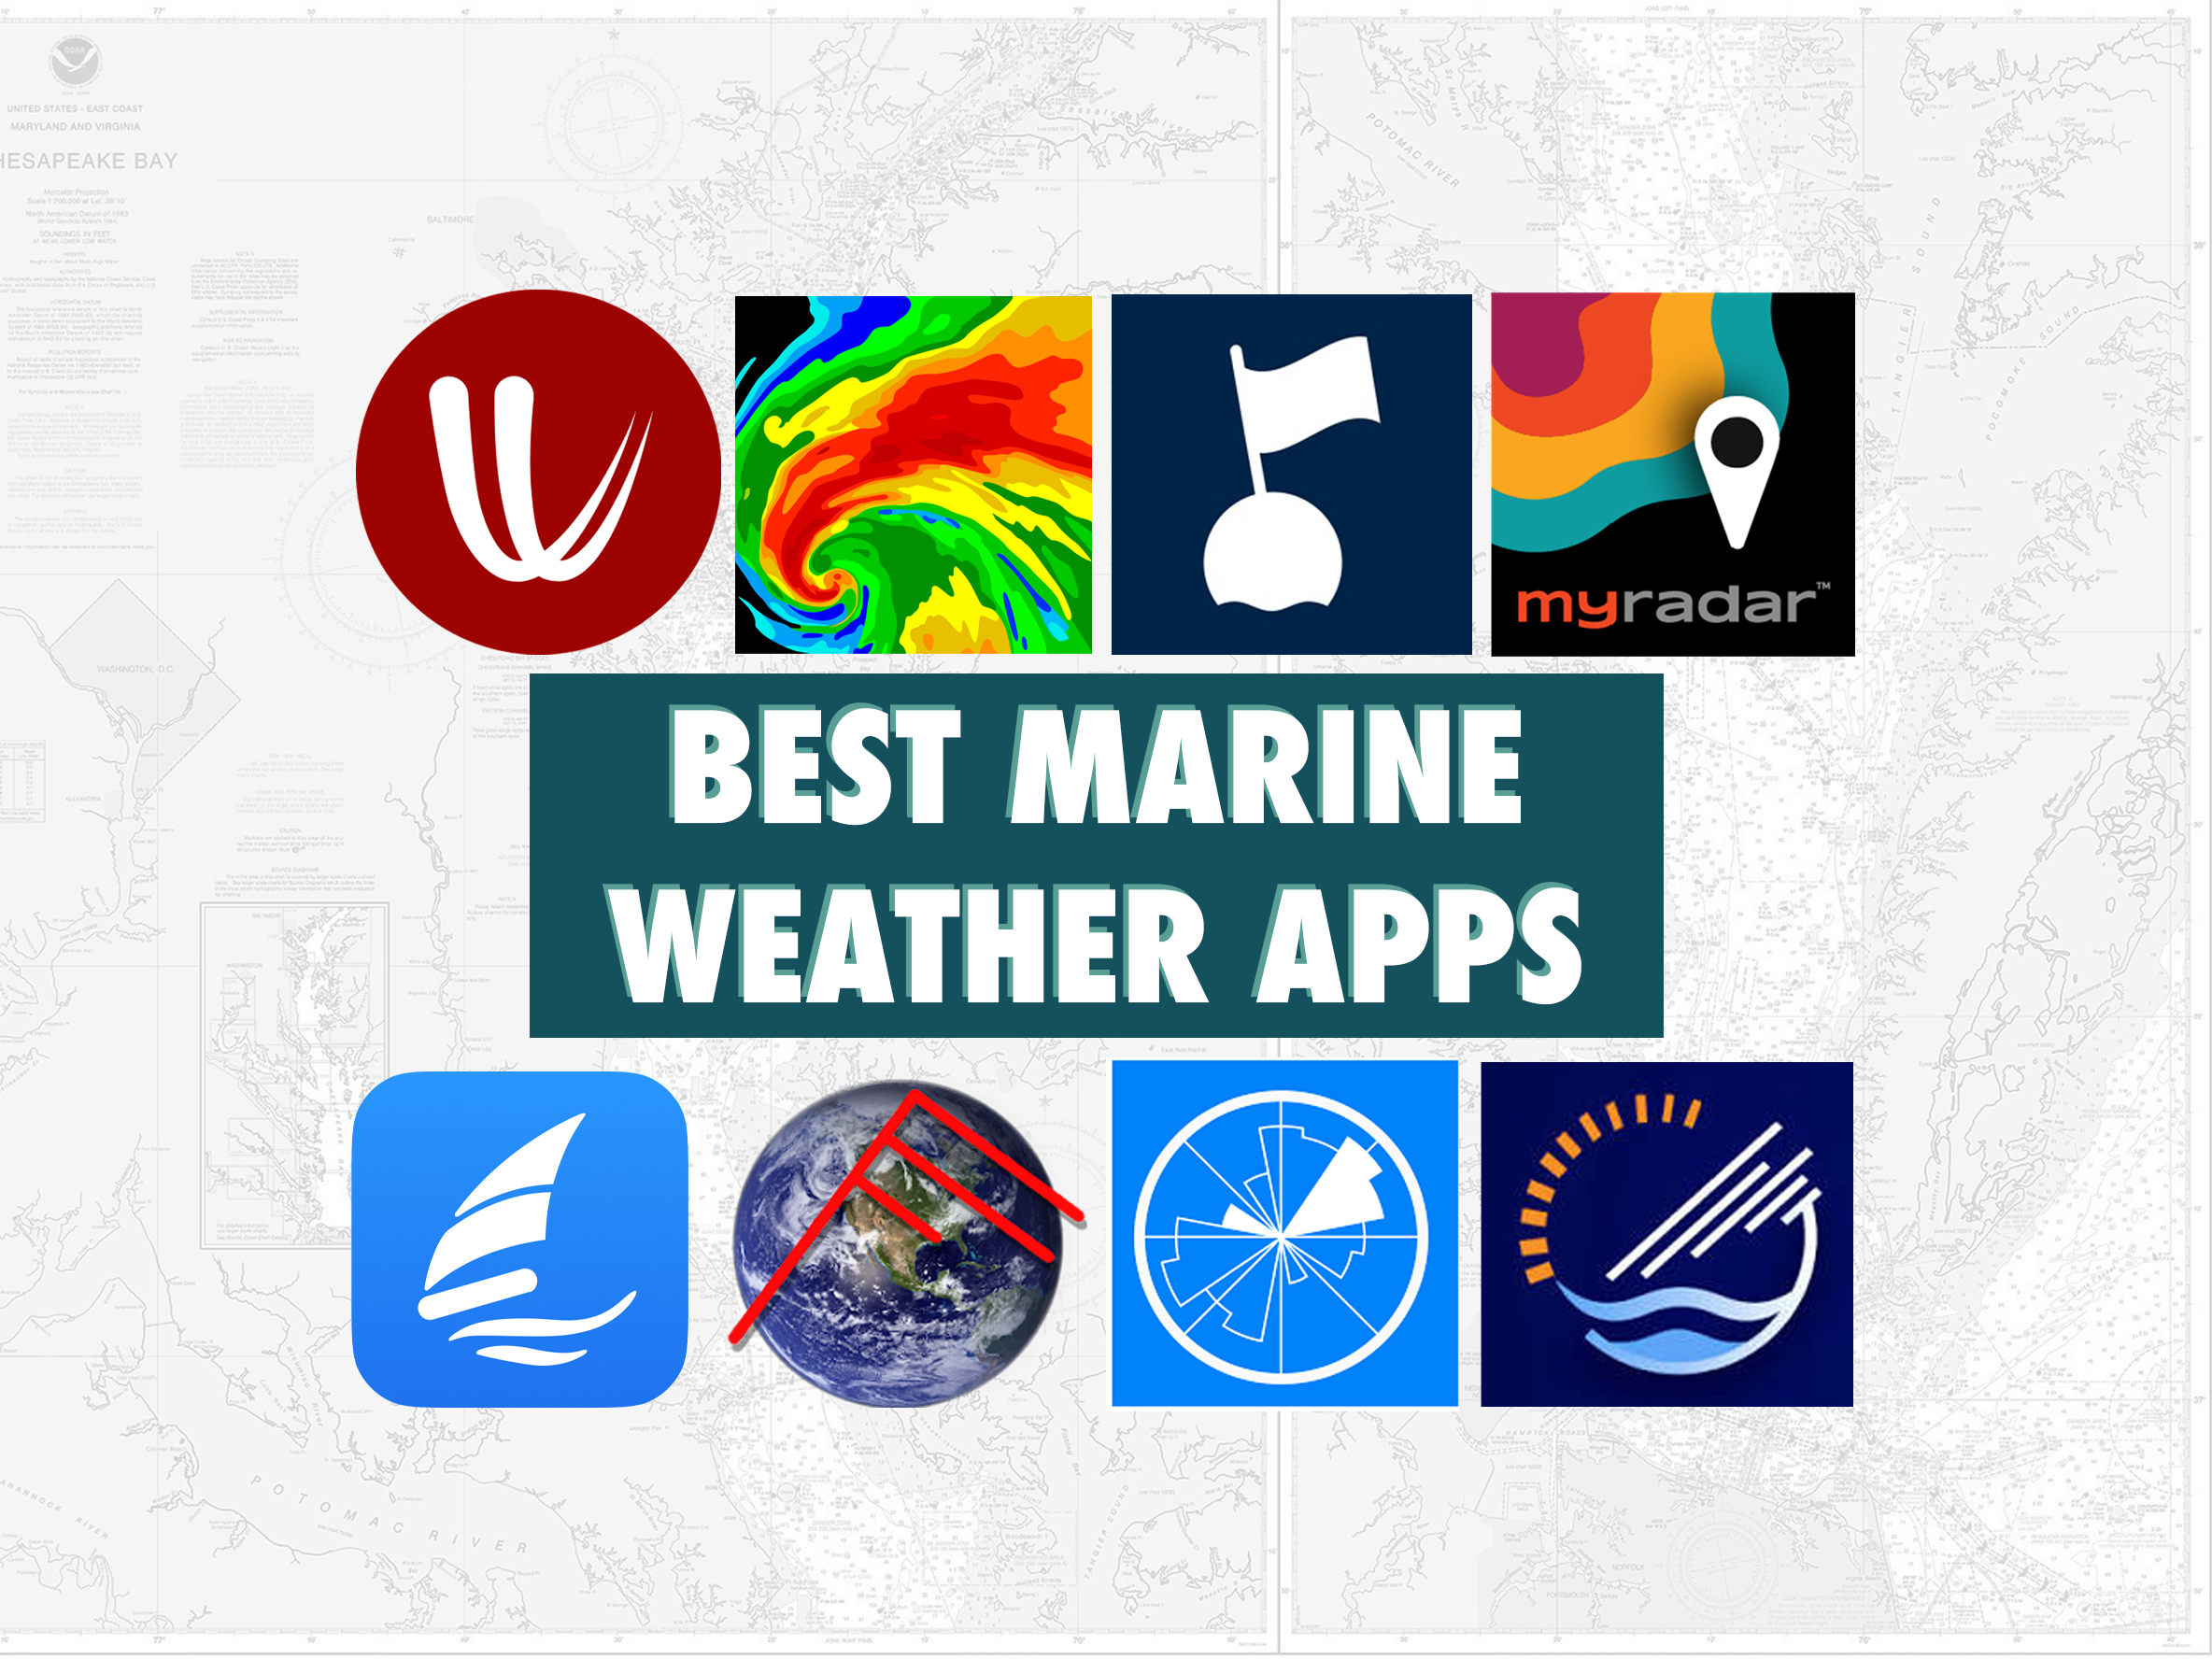 The Best Marine Weather Apps for Boating